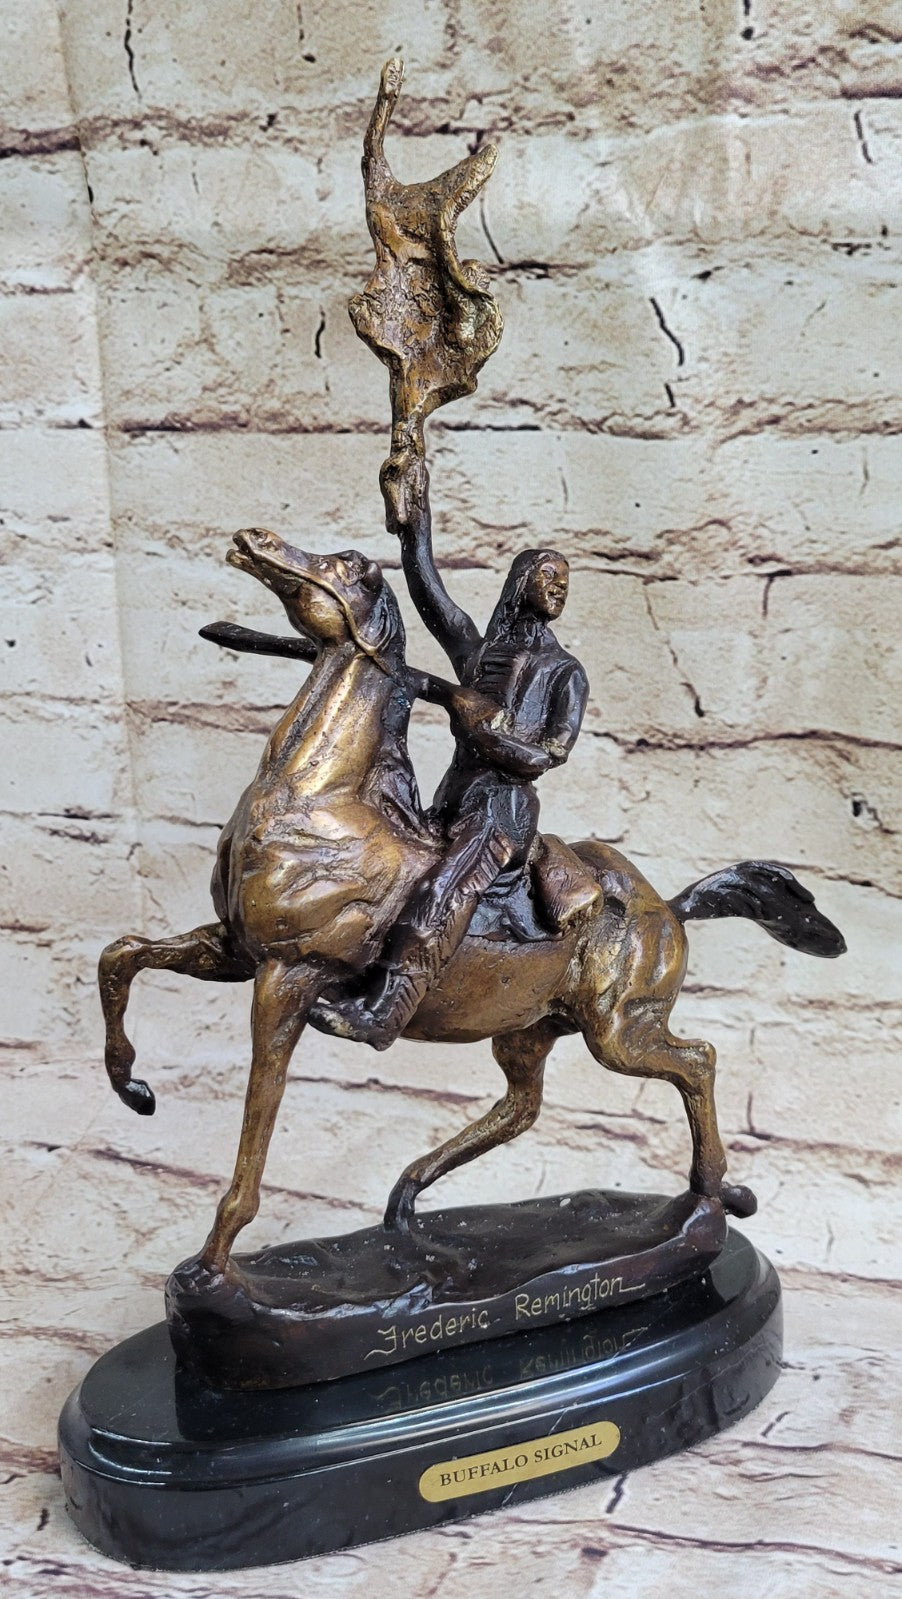 Handcrafted bronze sculpture SALE Indian American Native Remington`S Frederic